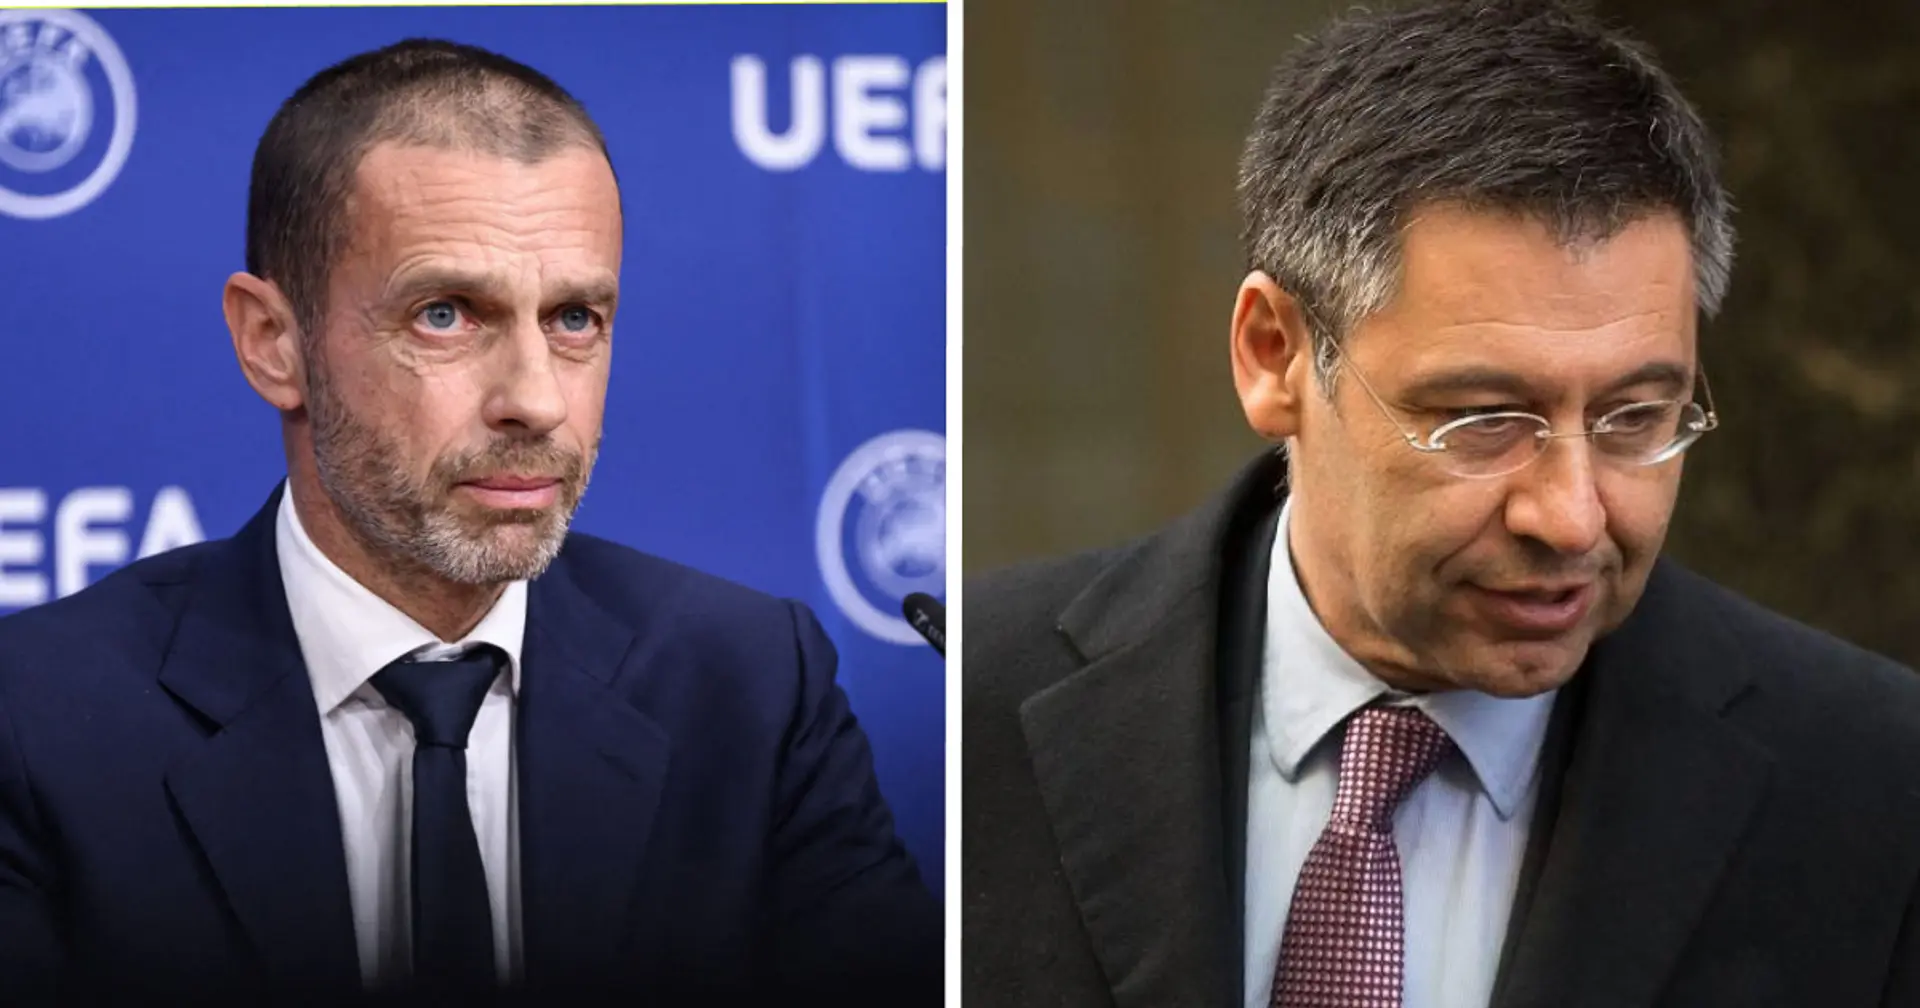 Barca could be seriously sanctioned by UEFA for FFP breach during Bartomeu administration